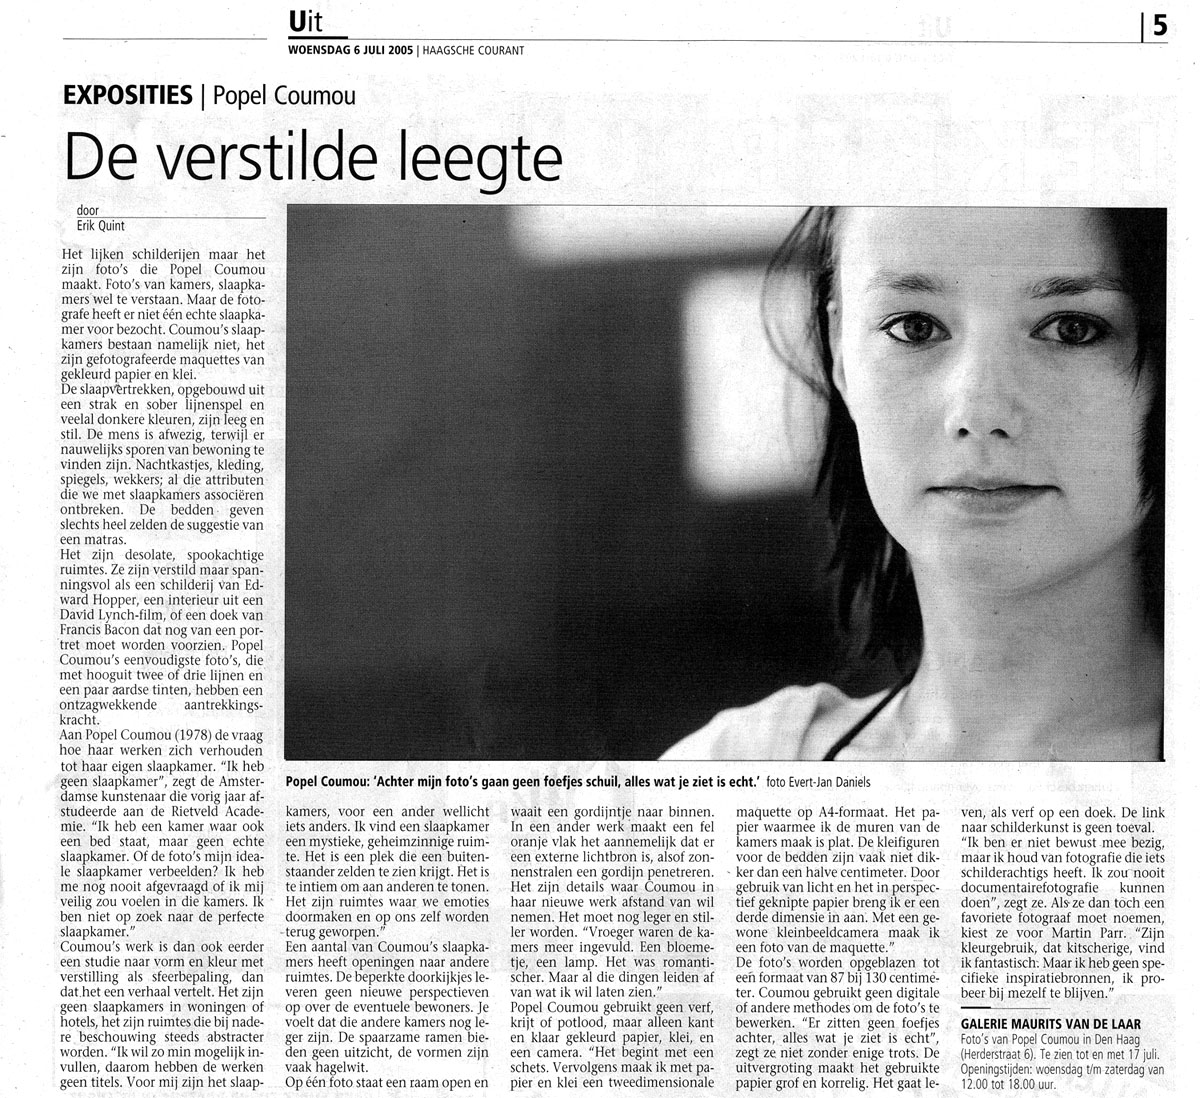 Haagse Courant 6 juli 2005 By Erik Quint